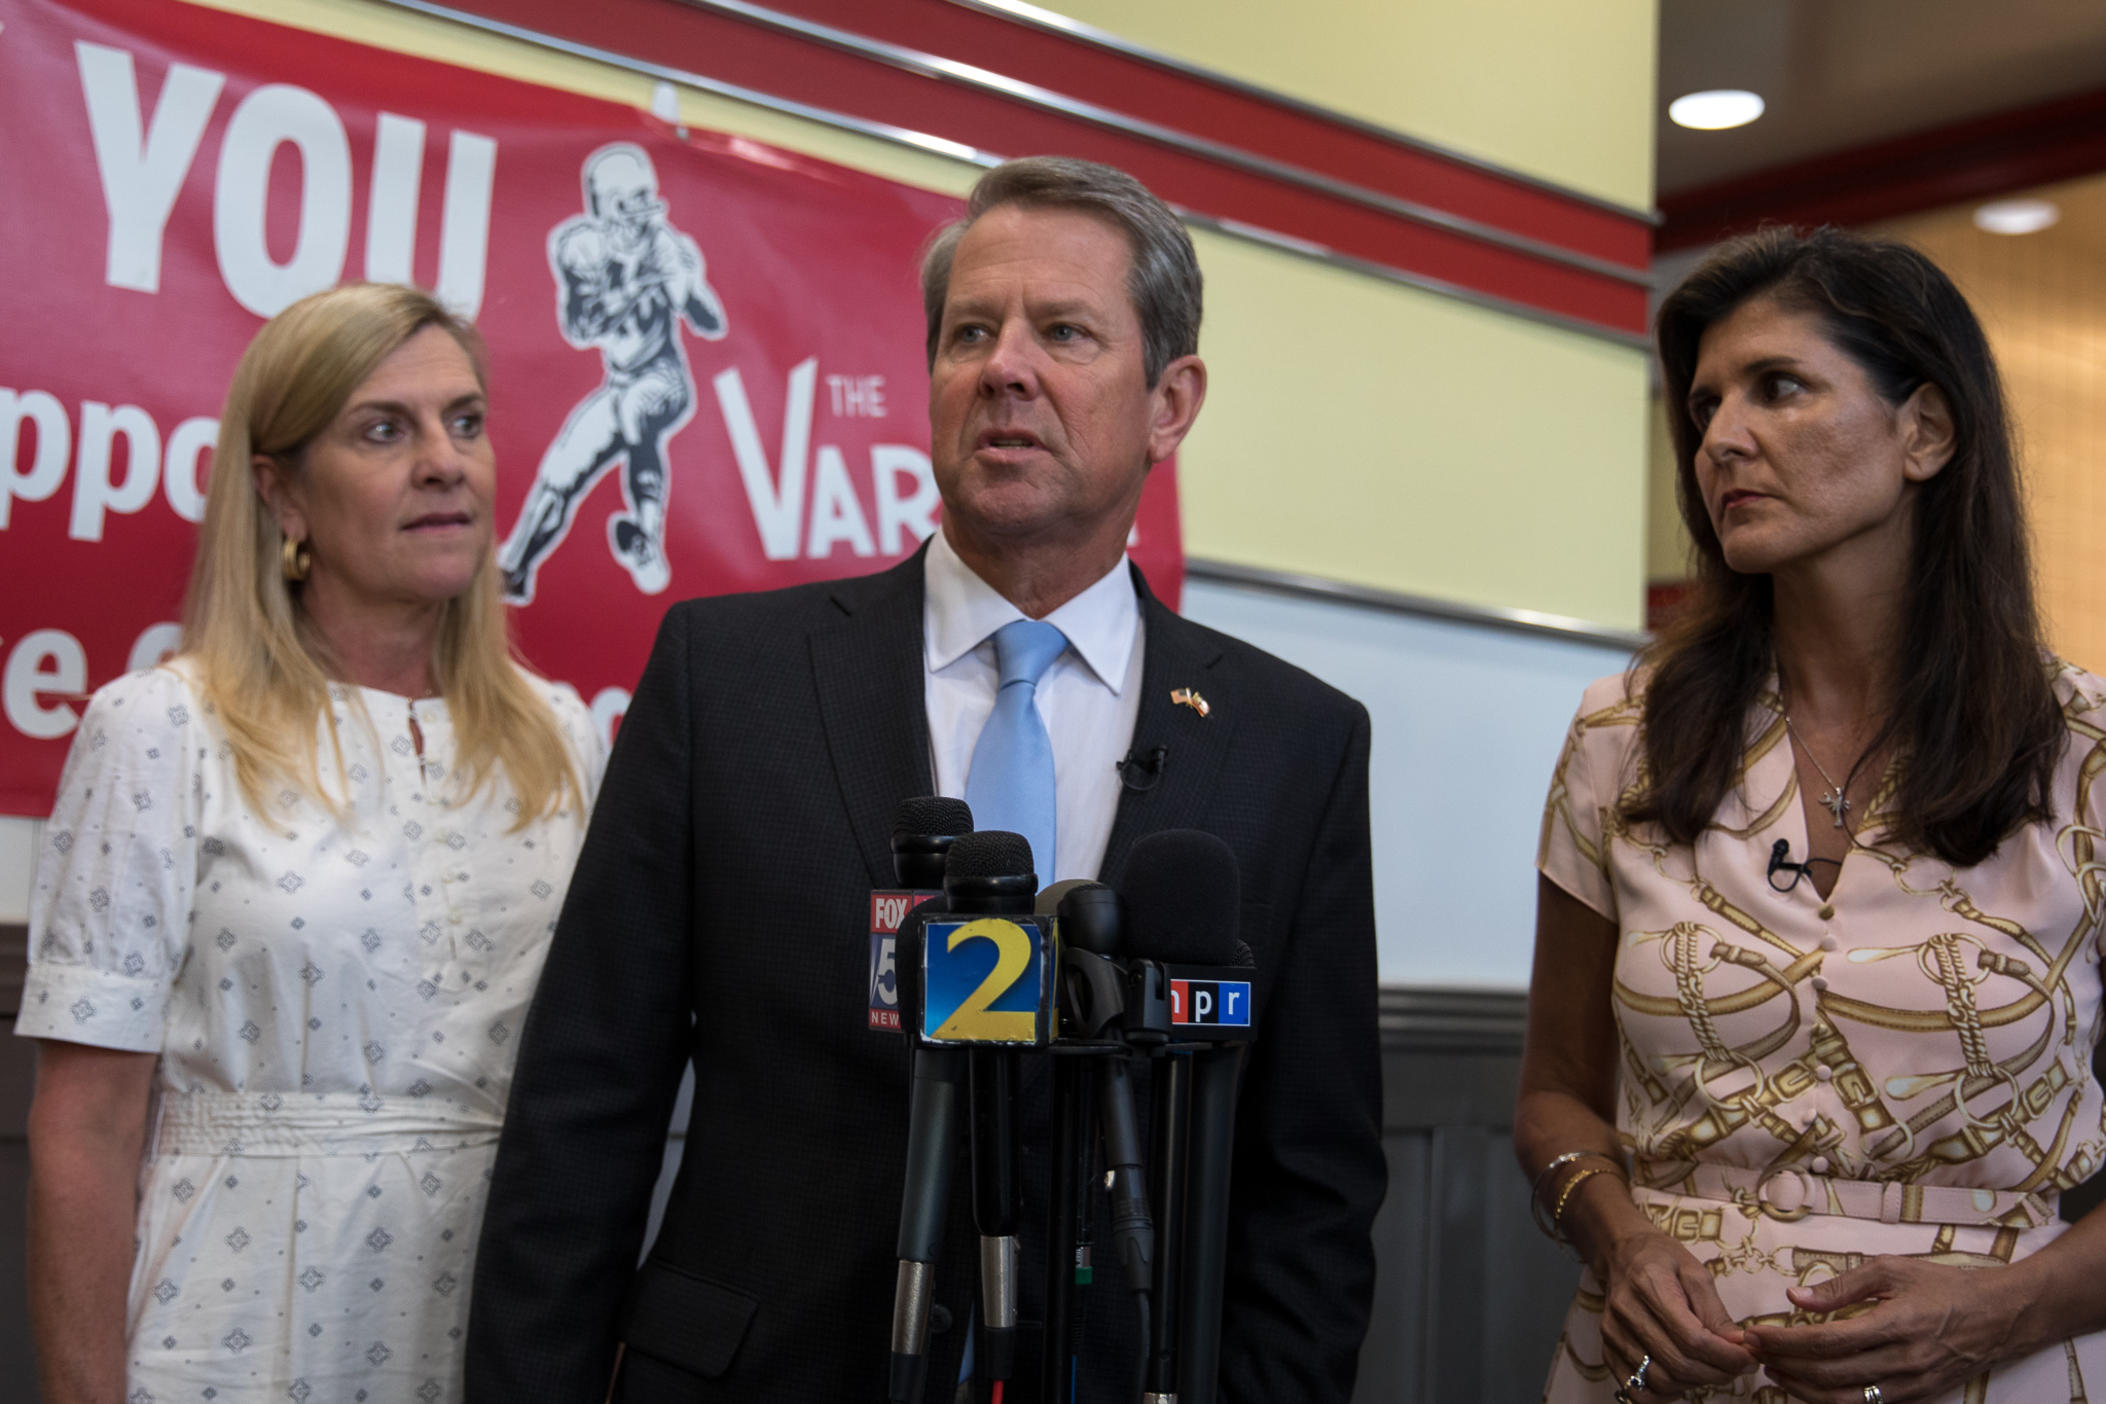 Gov. Brian Kemp campaigns with Nikki Haley (right) and his wife Marty Kemp